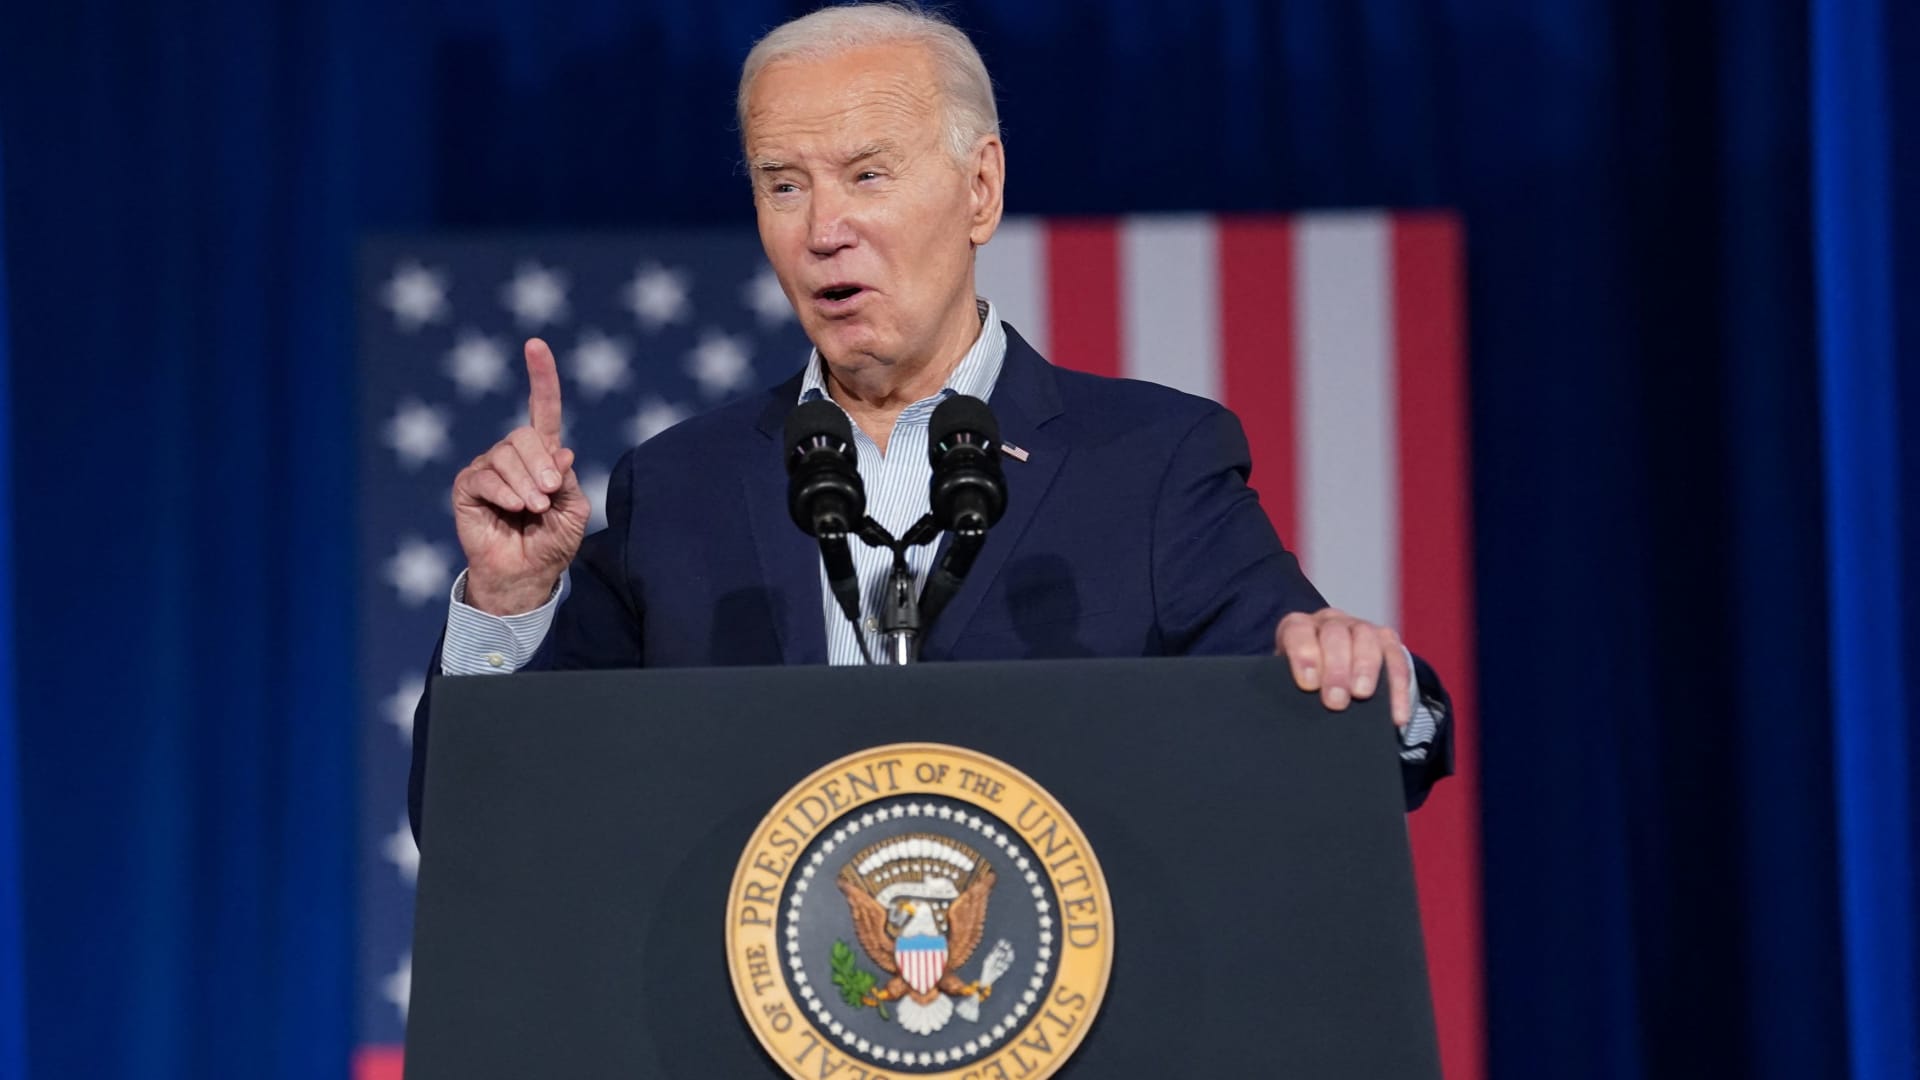 Biden blames China, Japan and India’s economic woes on ‘xenophobia’ [Video]